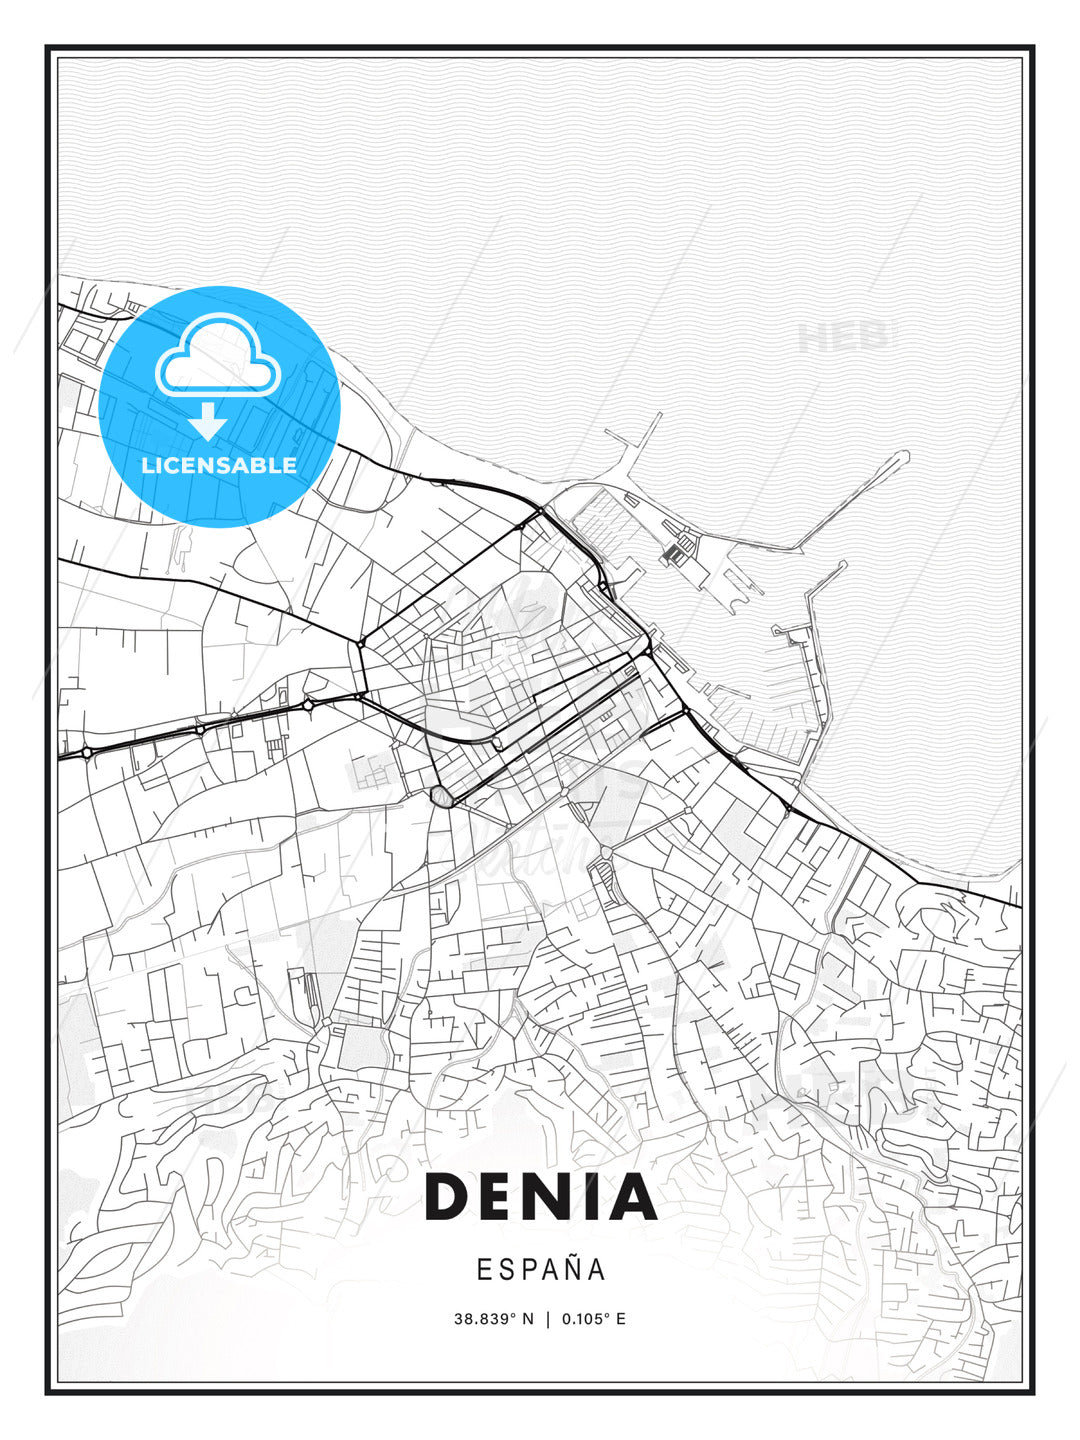 Denia, Spain, Modern Print Template in Various Formats - HEBSTREITS Sketches